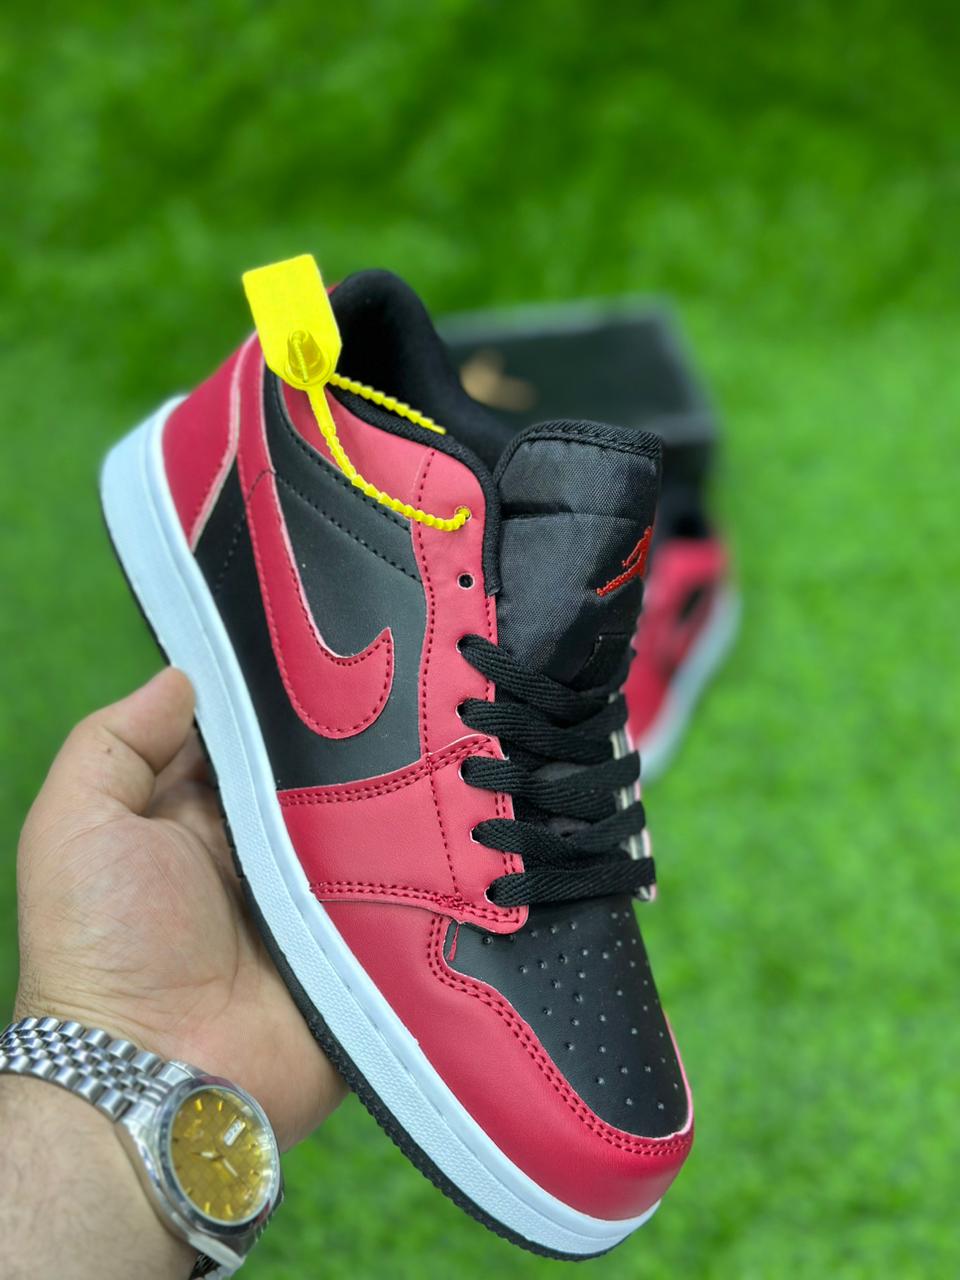 AR JDN 1 Low - Full Red with Black 2.0